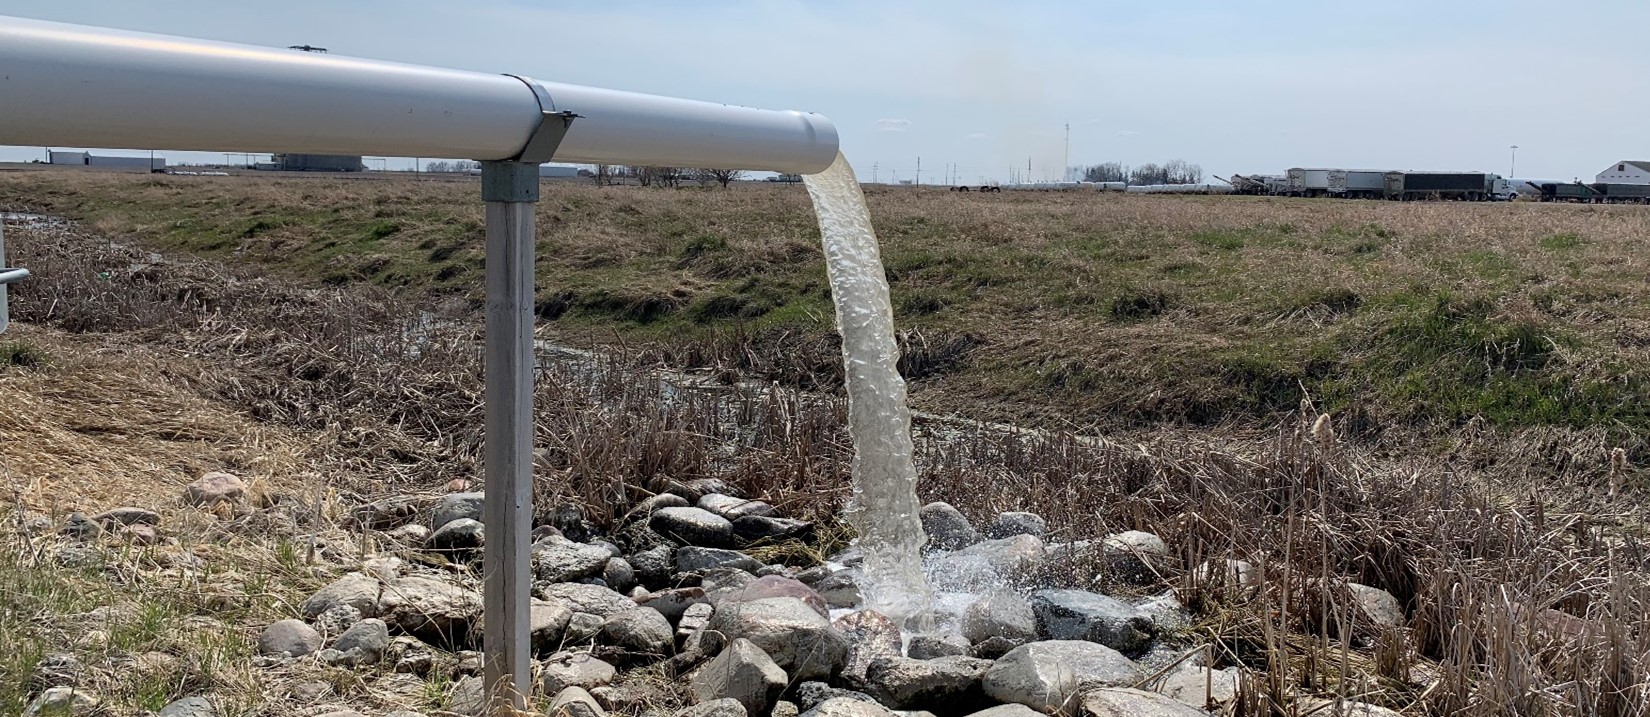 NDSU LREC Groundwater Management Research Project Lift Station